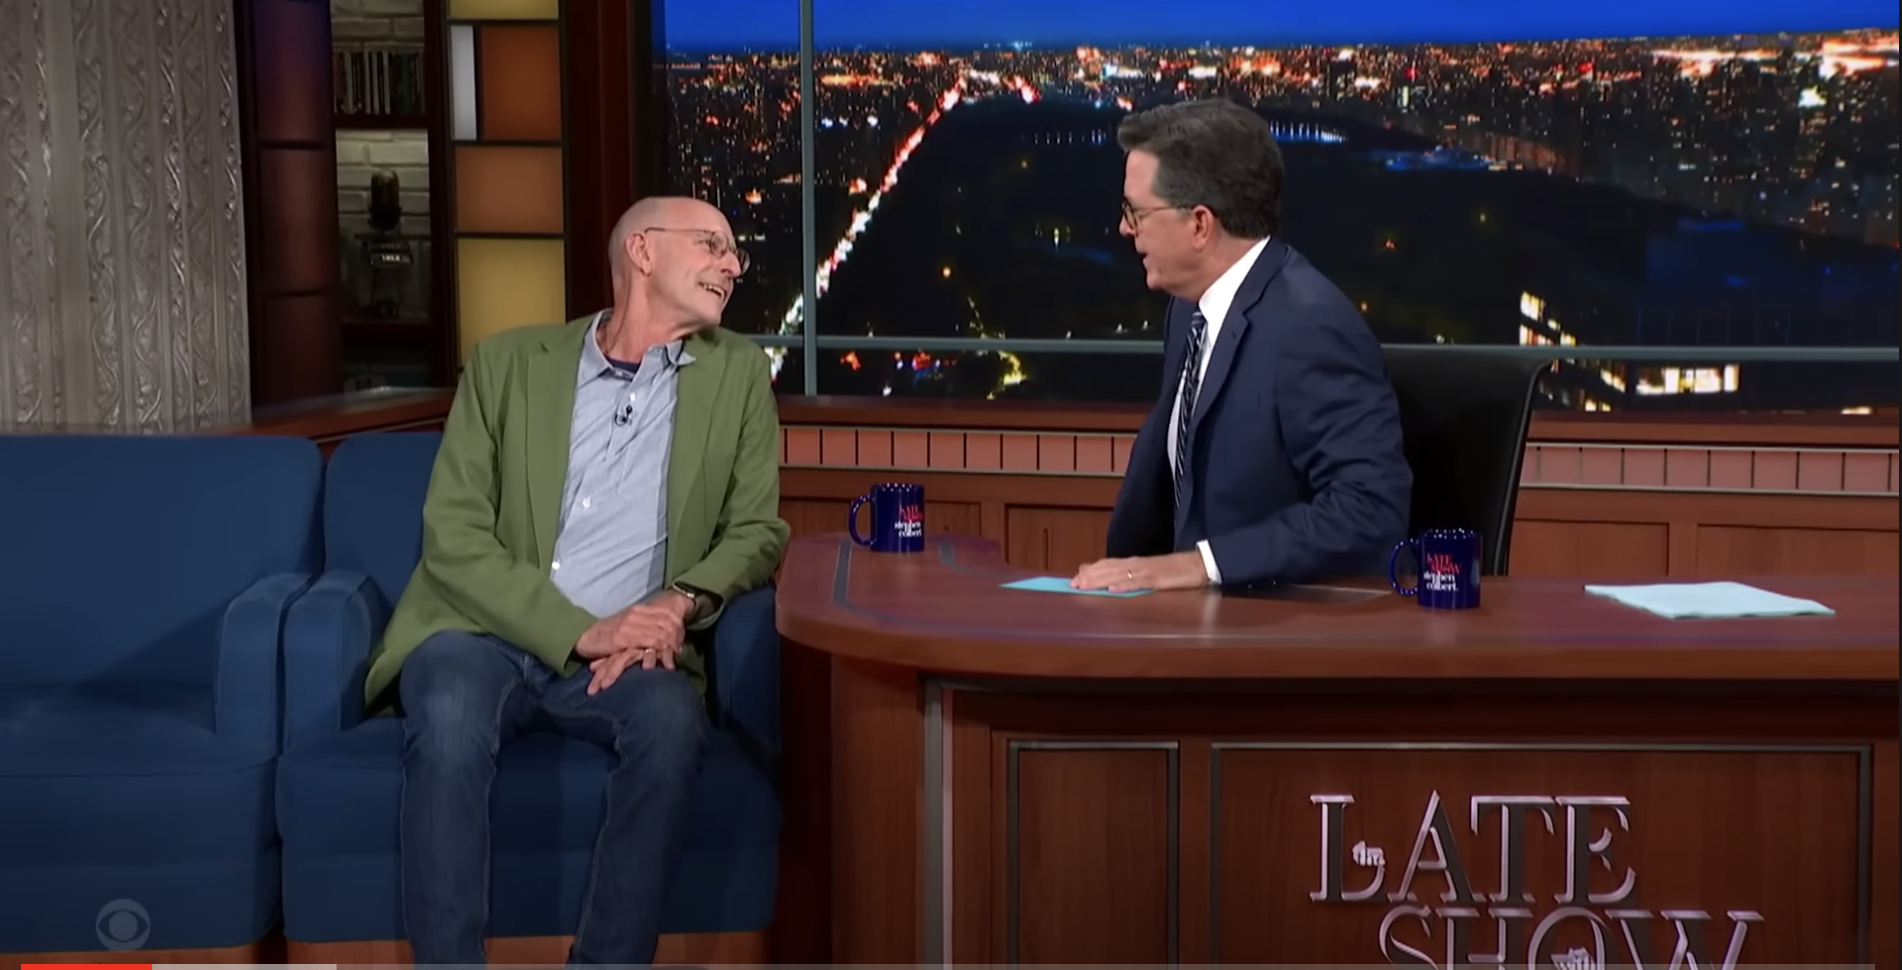 Michael Pollan on The Late Show with Stephen Colbert